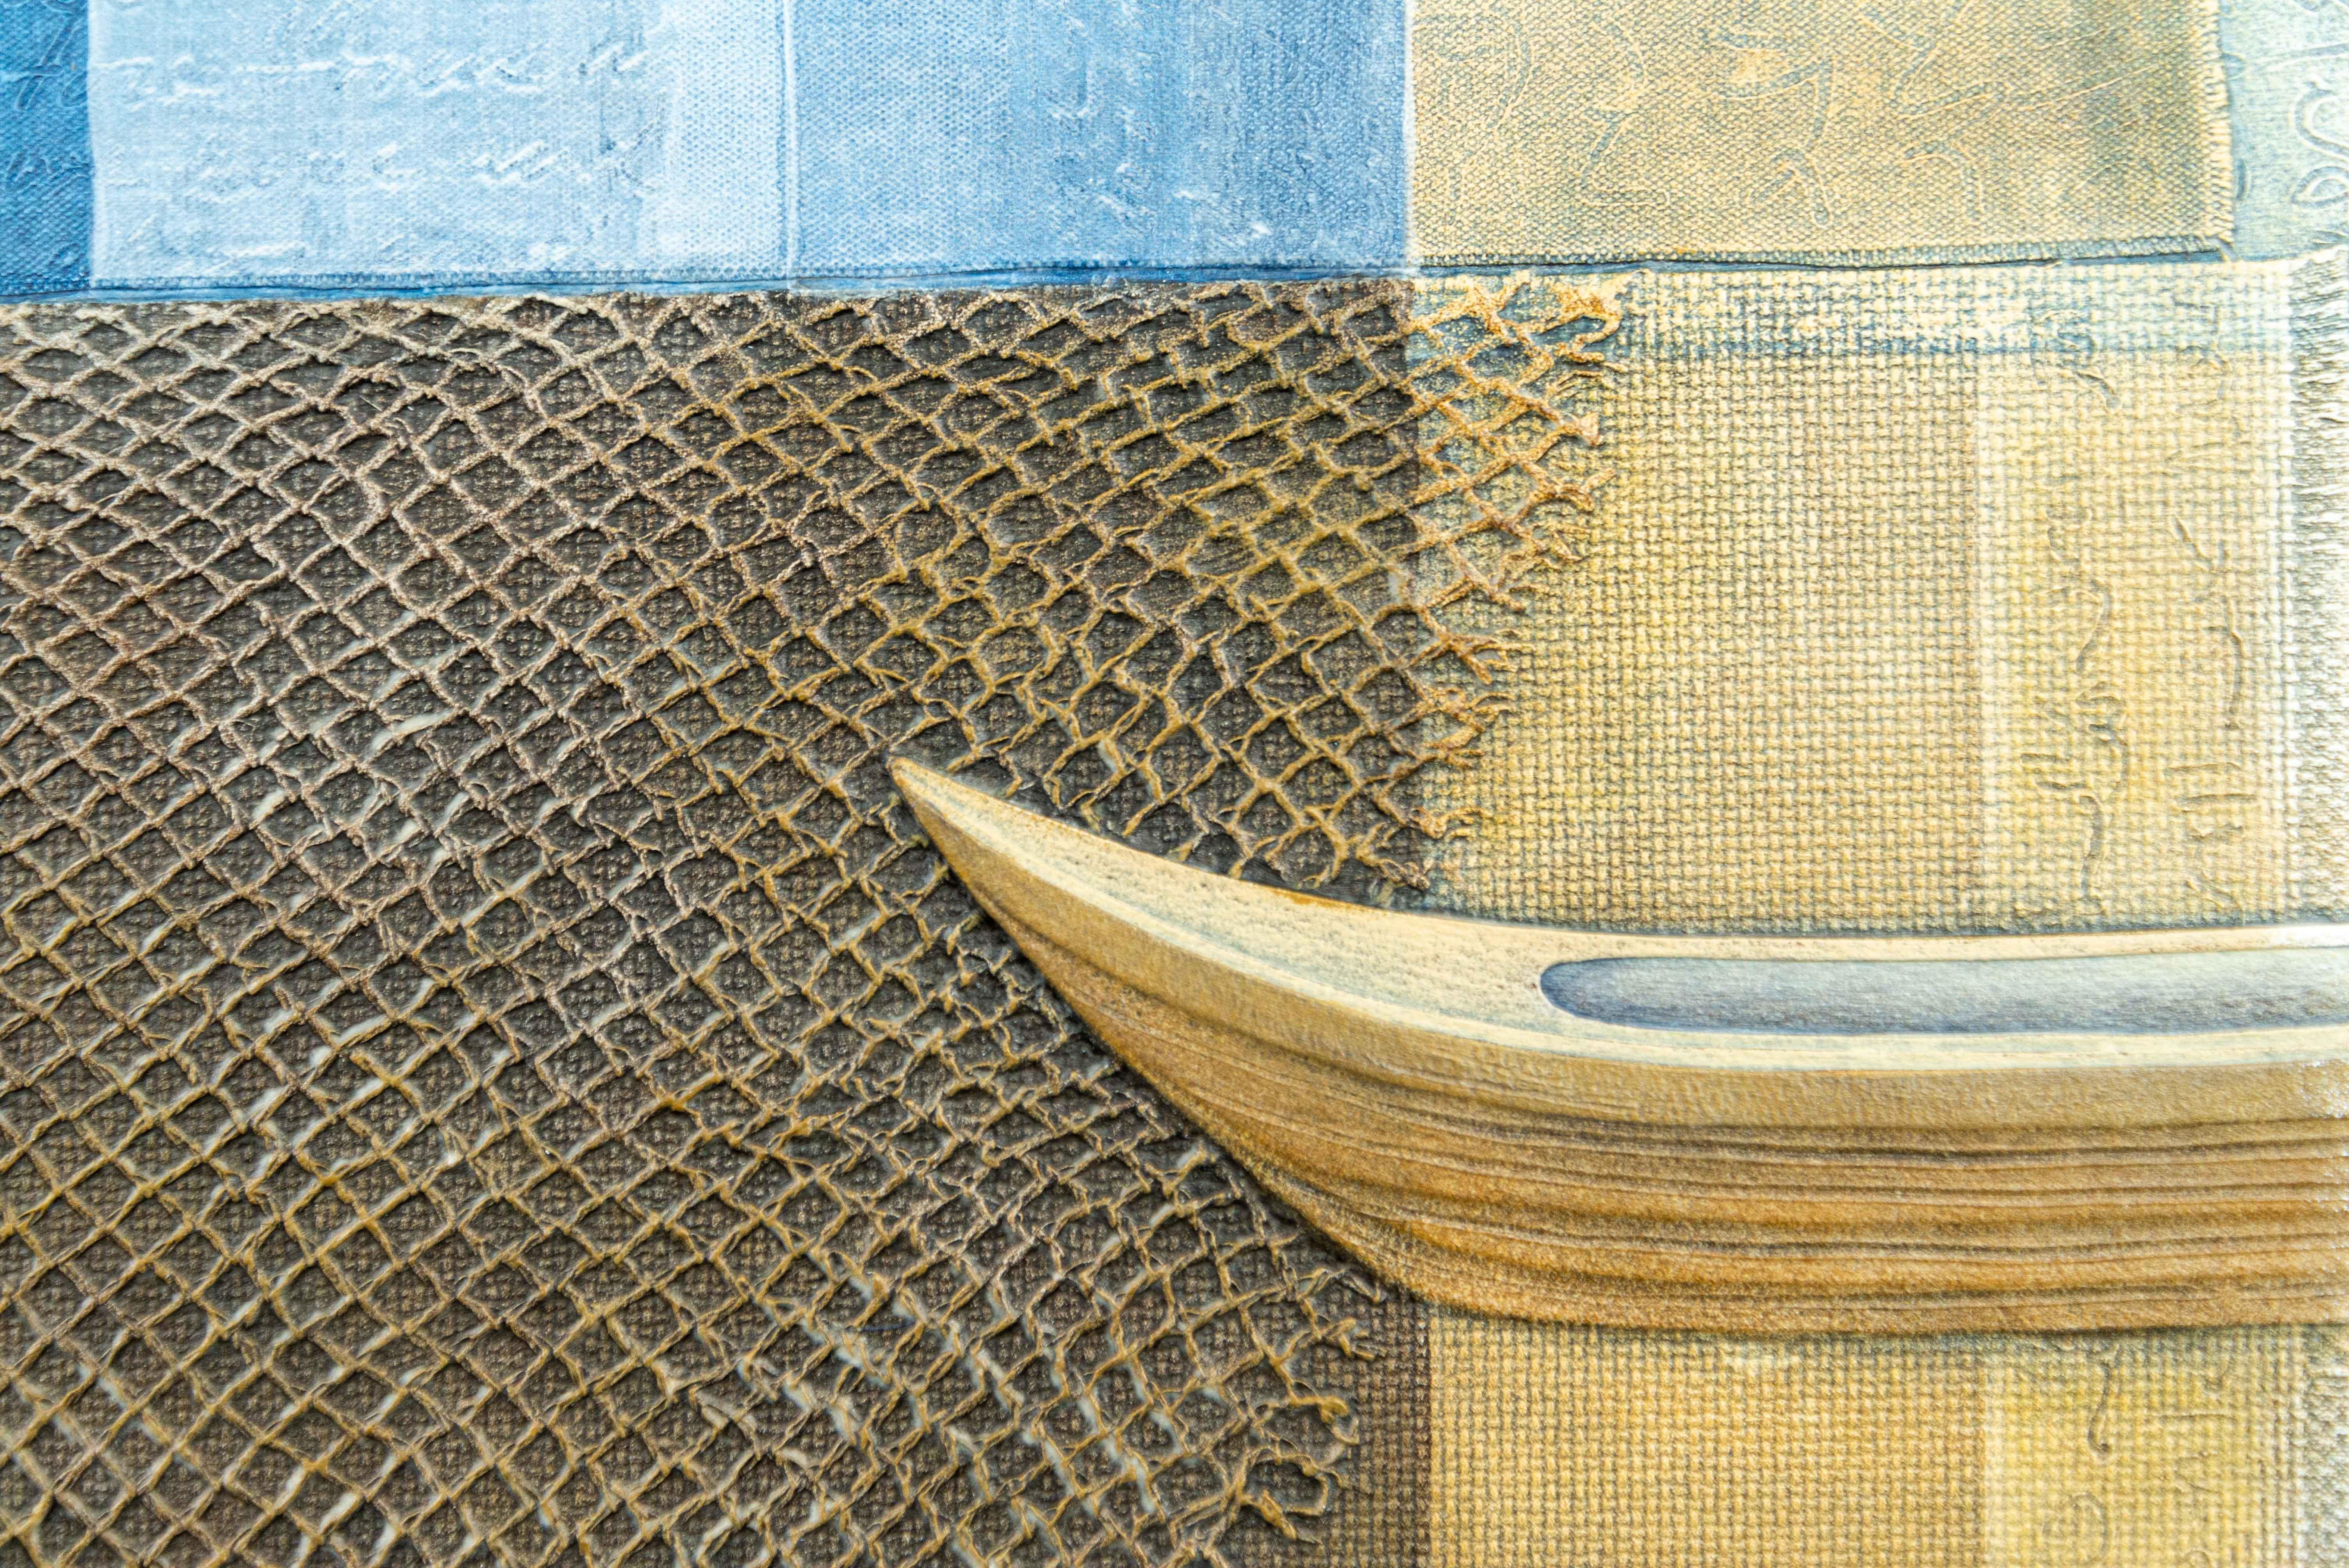 Simply gorgeous! Two canoe-shaped vessels appear to traverse the canvas in this recent series of enigmatic works by Heather Allen Hietala. The natural earthy colour palette of her acrylic and mixed media composition is accented by broad vertical